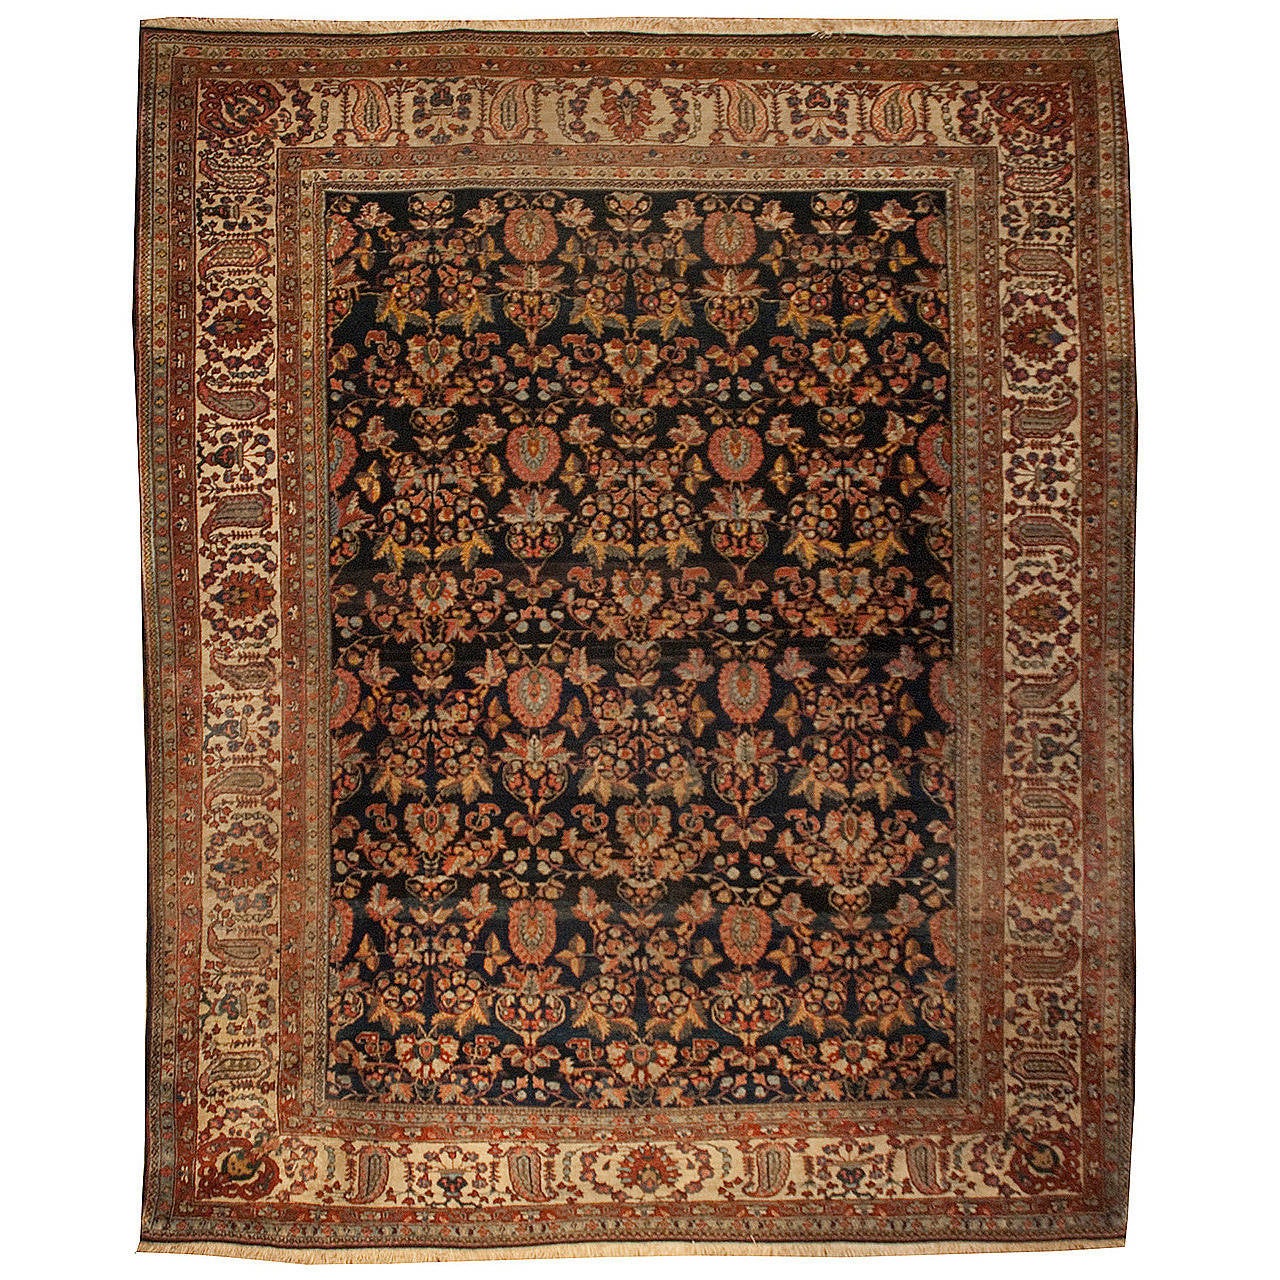 19th Century Kashan Rug For Sale at 1stdibs